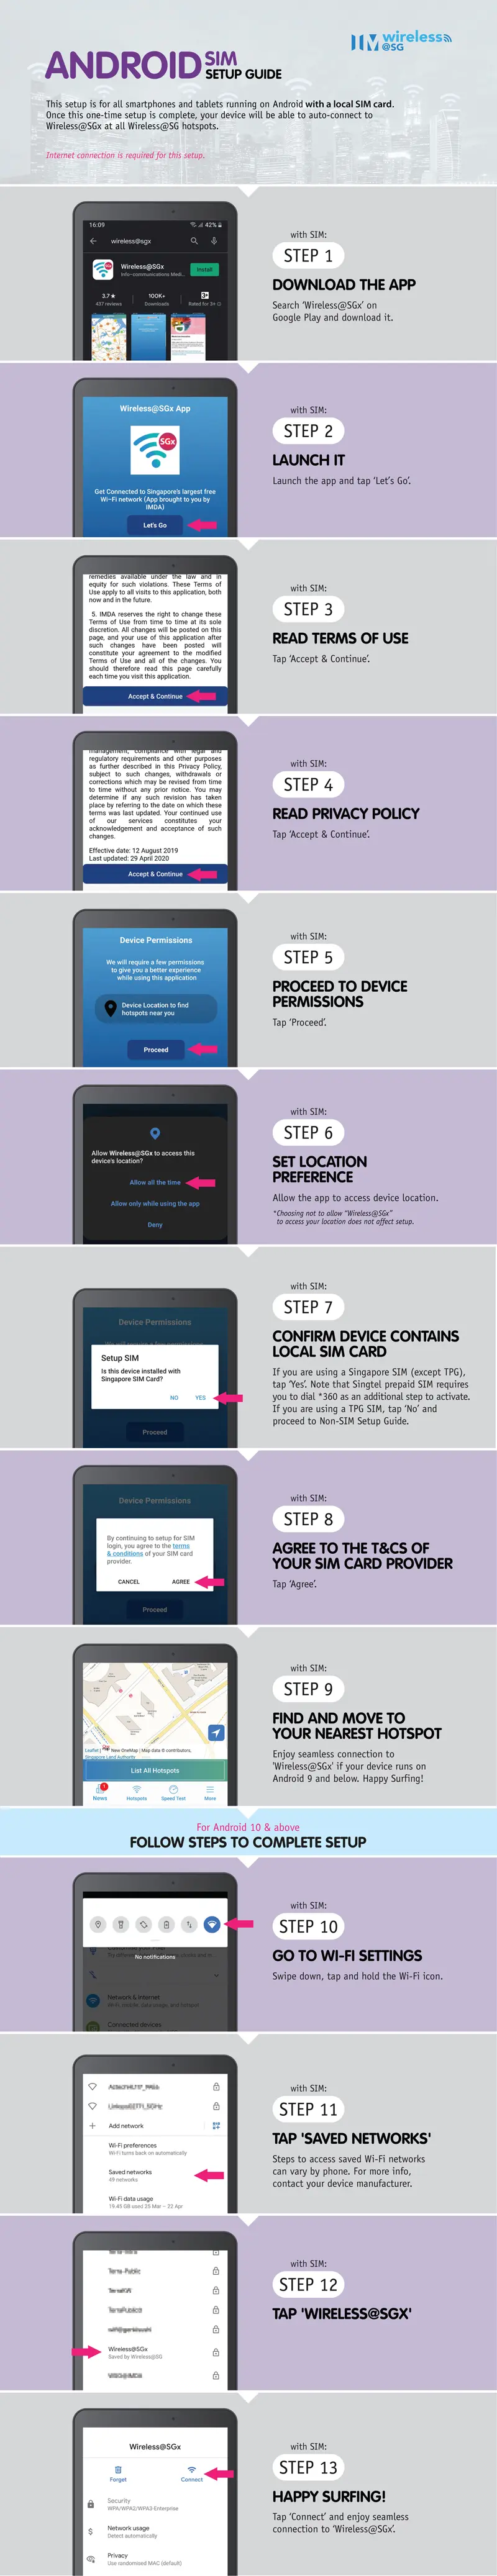 Wireless@SGx app step-by-step infographic setup guide for Android SIM